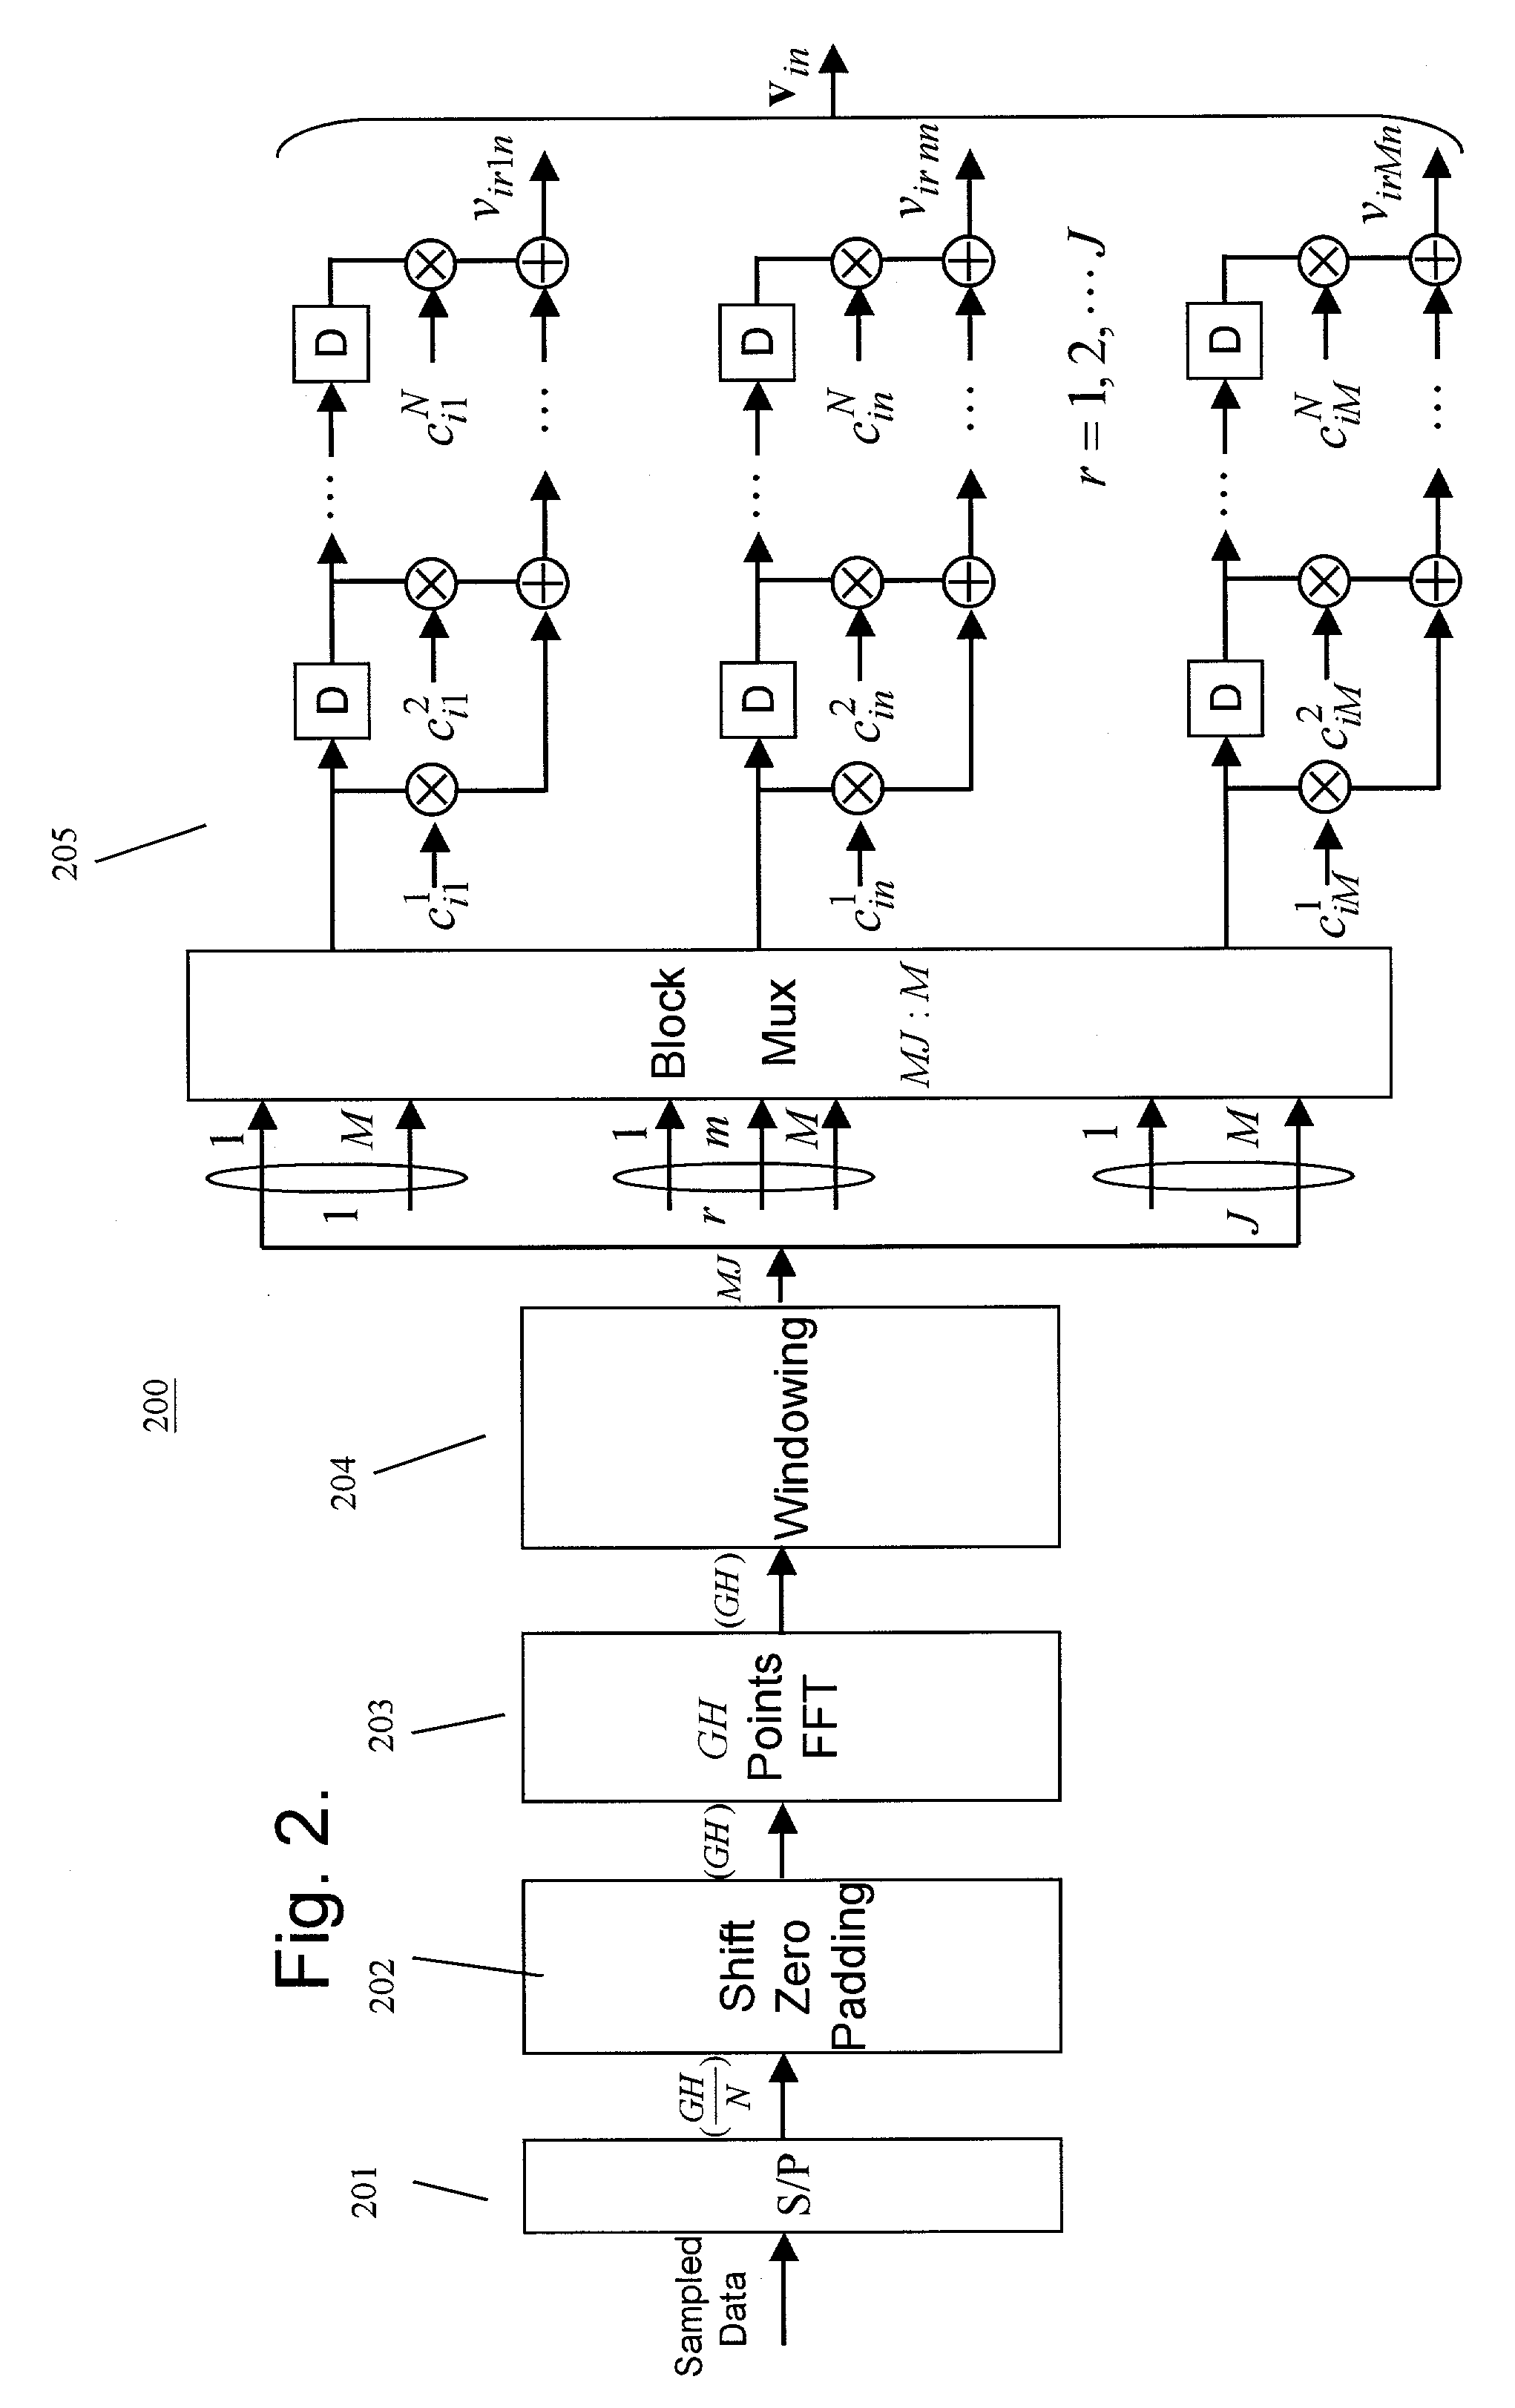 System and method for synchronizing multiuser signals for OFDM CDMA